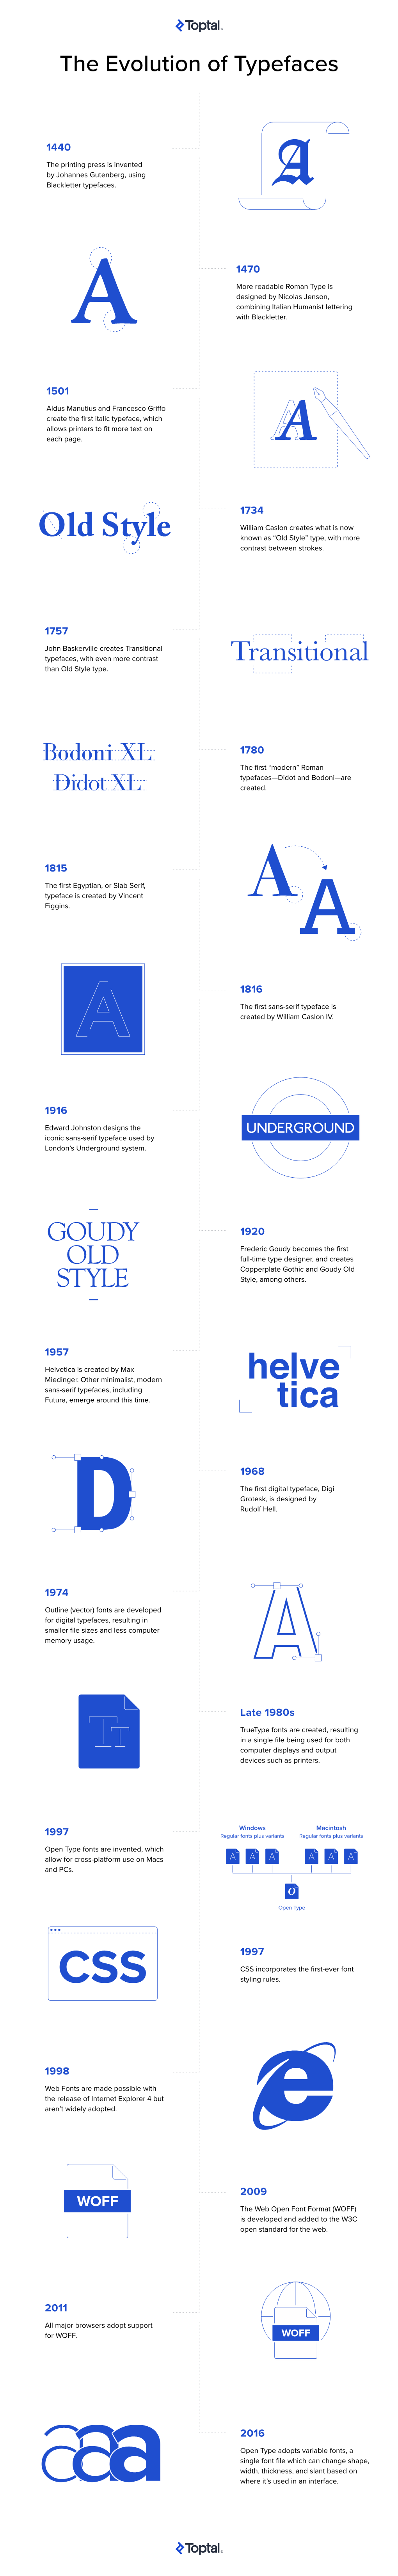 A Typeface History